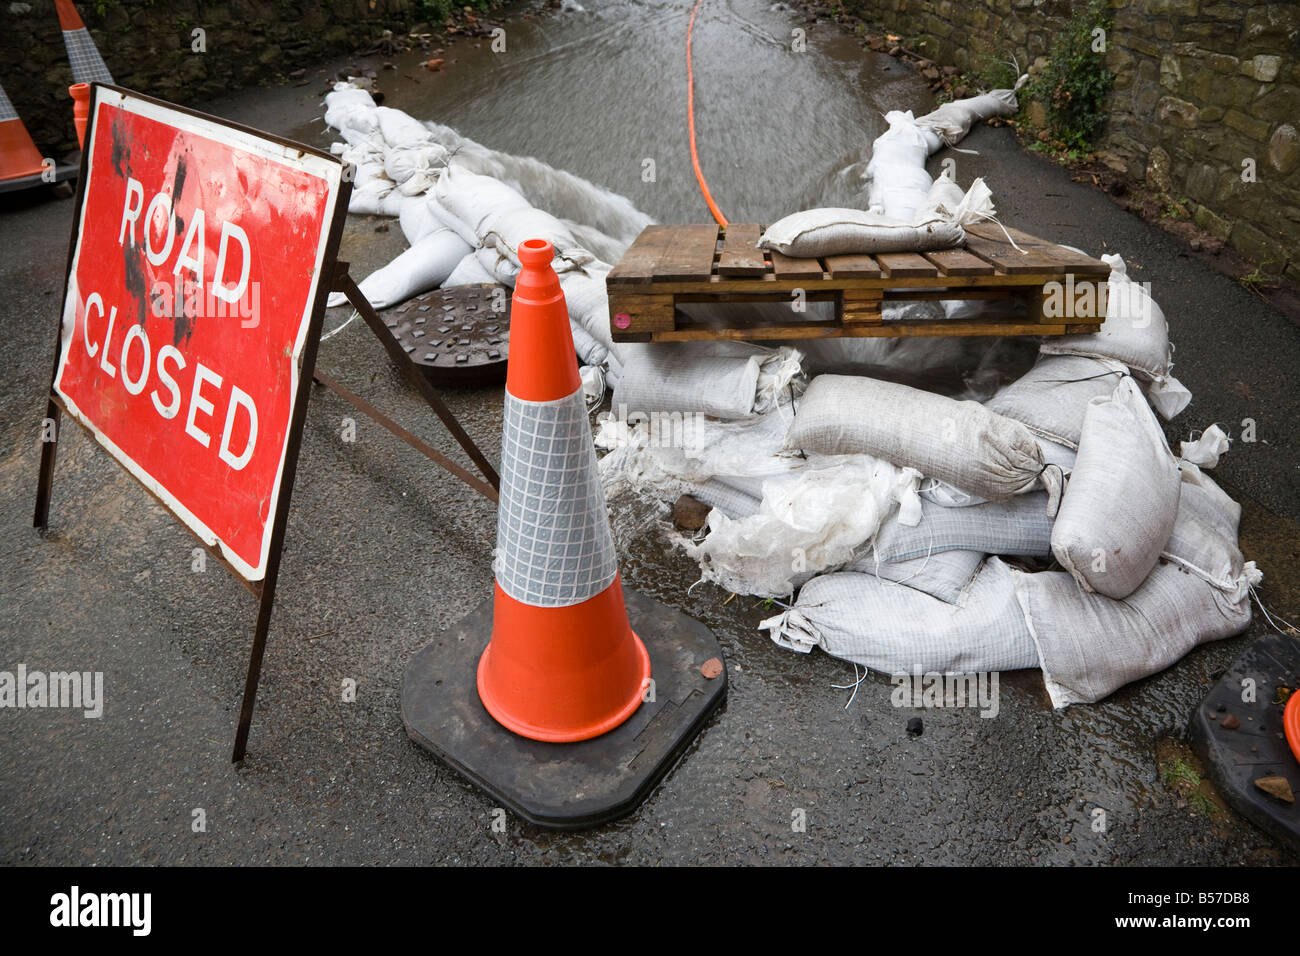 Road closed sign due to flooding with sandbags directing water into manhole Wales UK Stock Photo